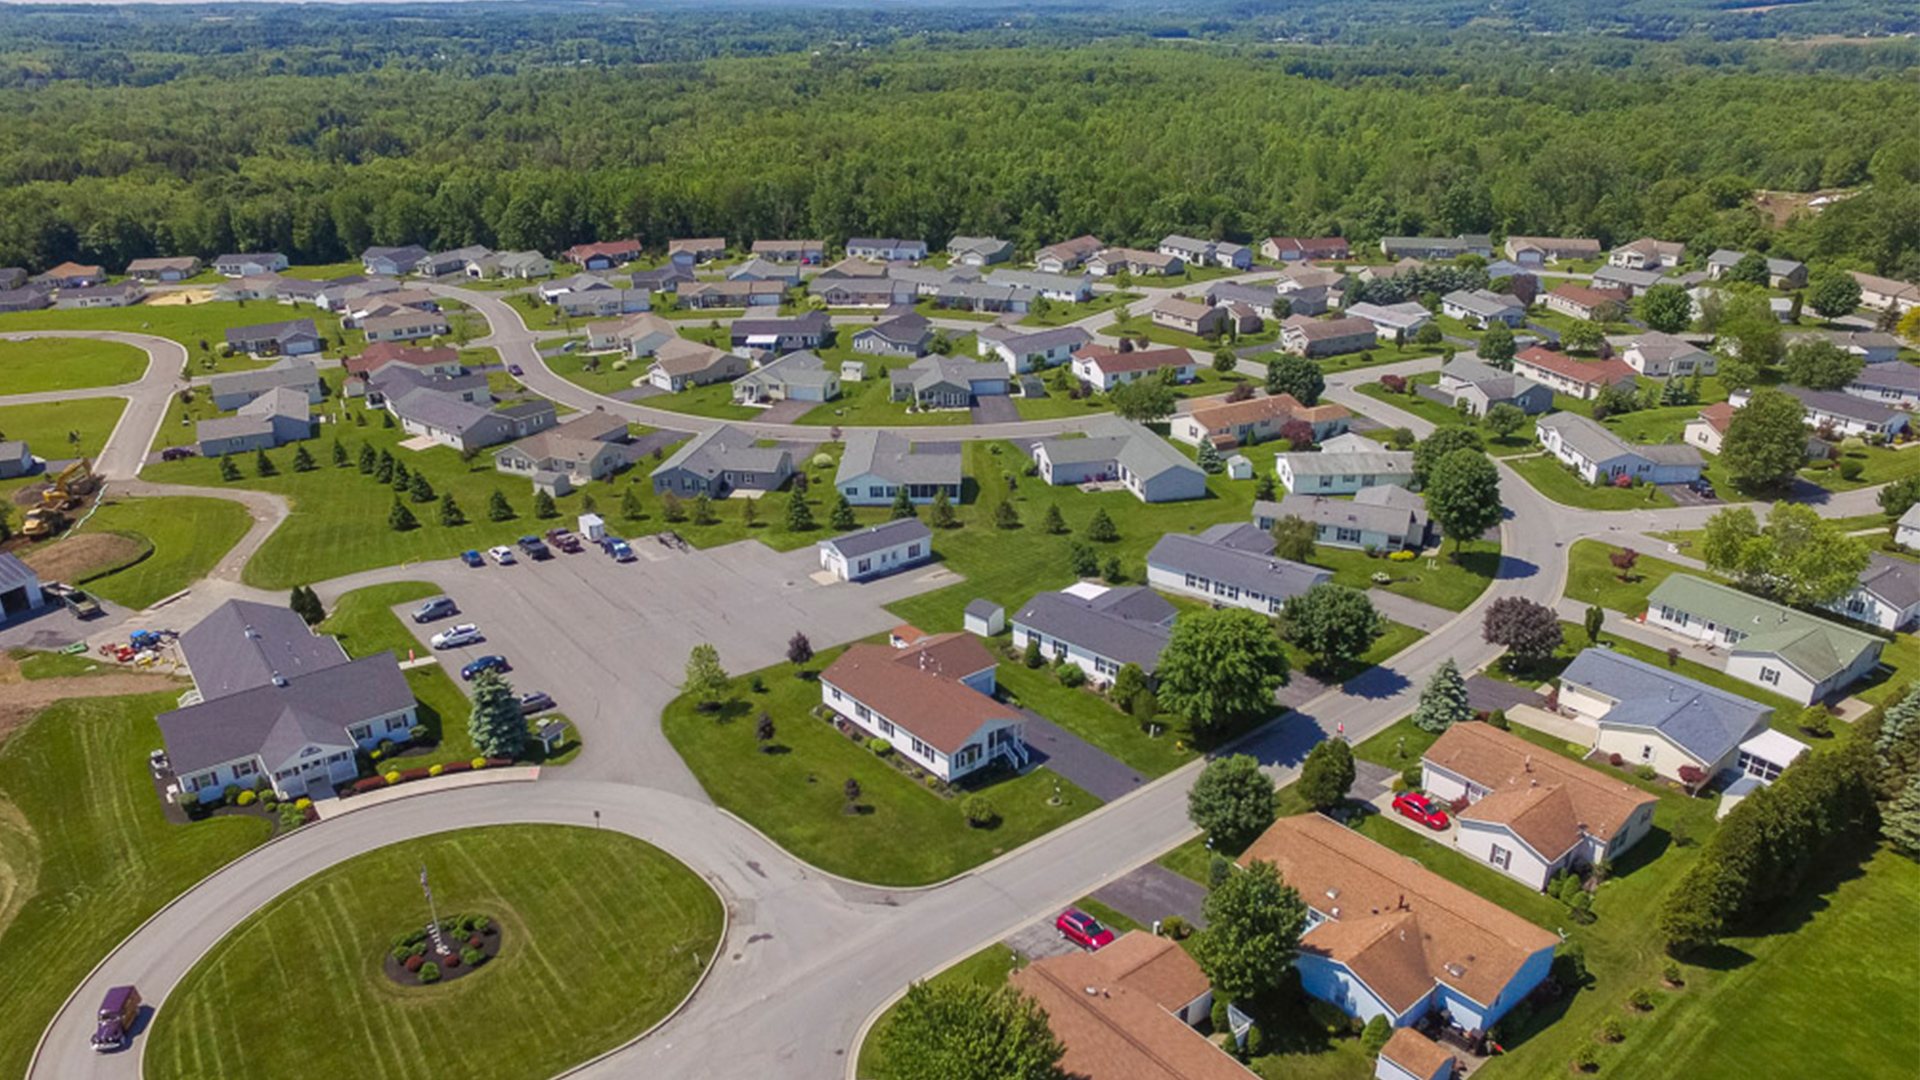 A bird's eye view of a housing development. There are over 50 houses in view